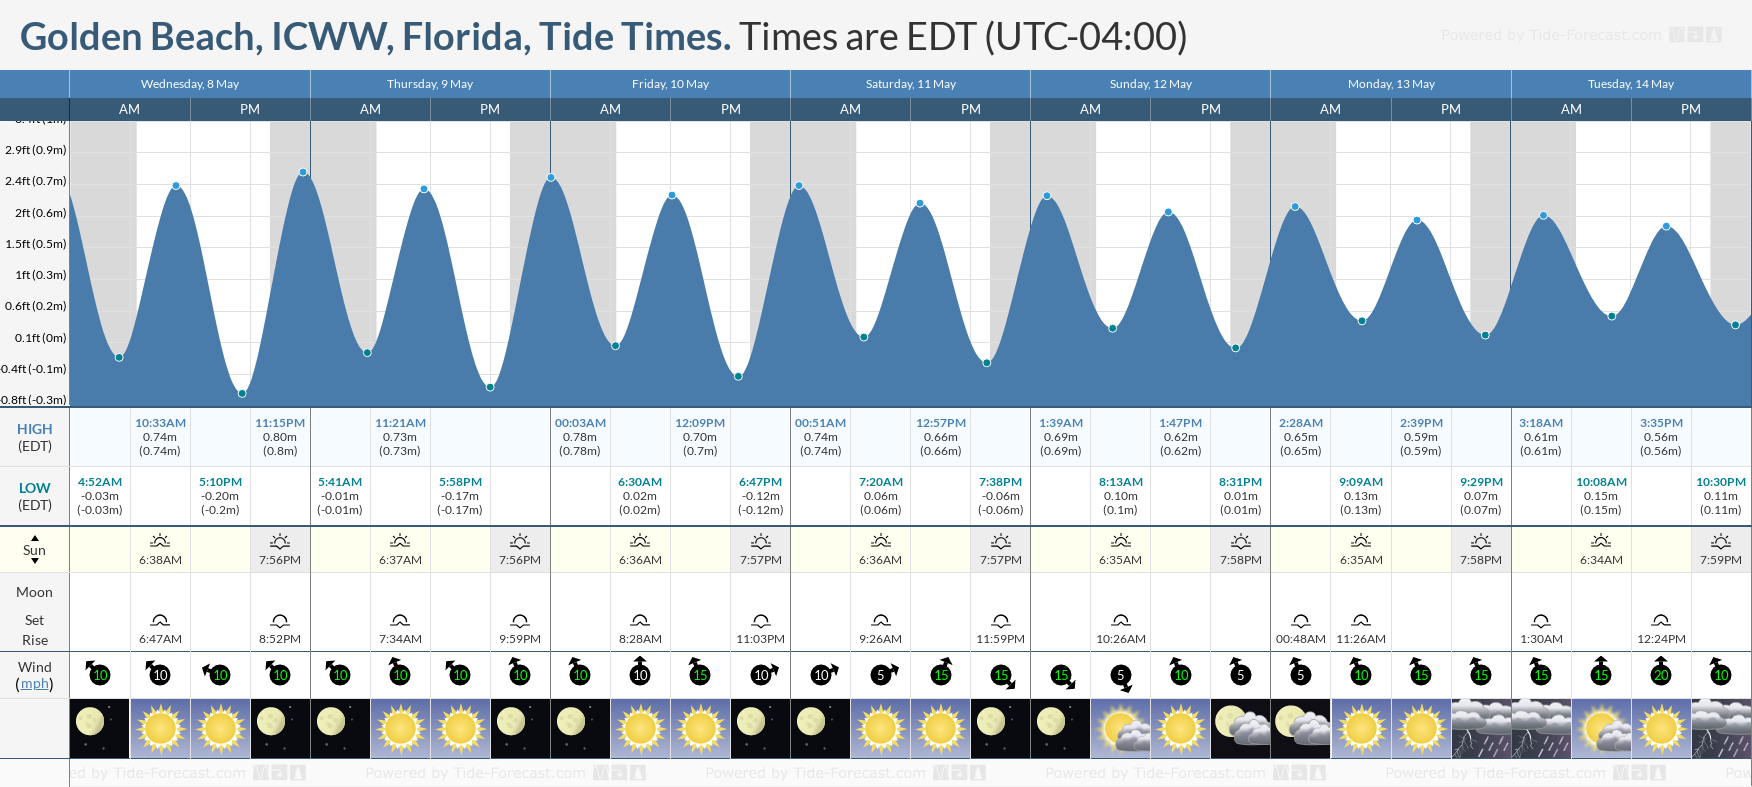 Golden Beach, ICWW, Florida Tide Chart including high and low tide tide times for the next 7 days